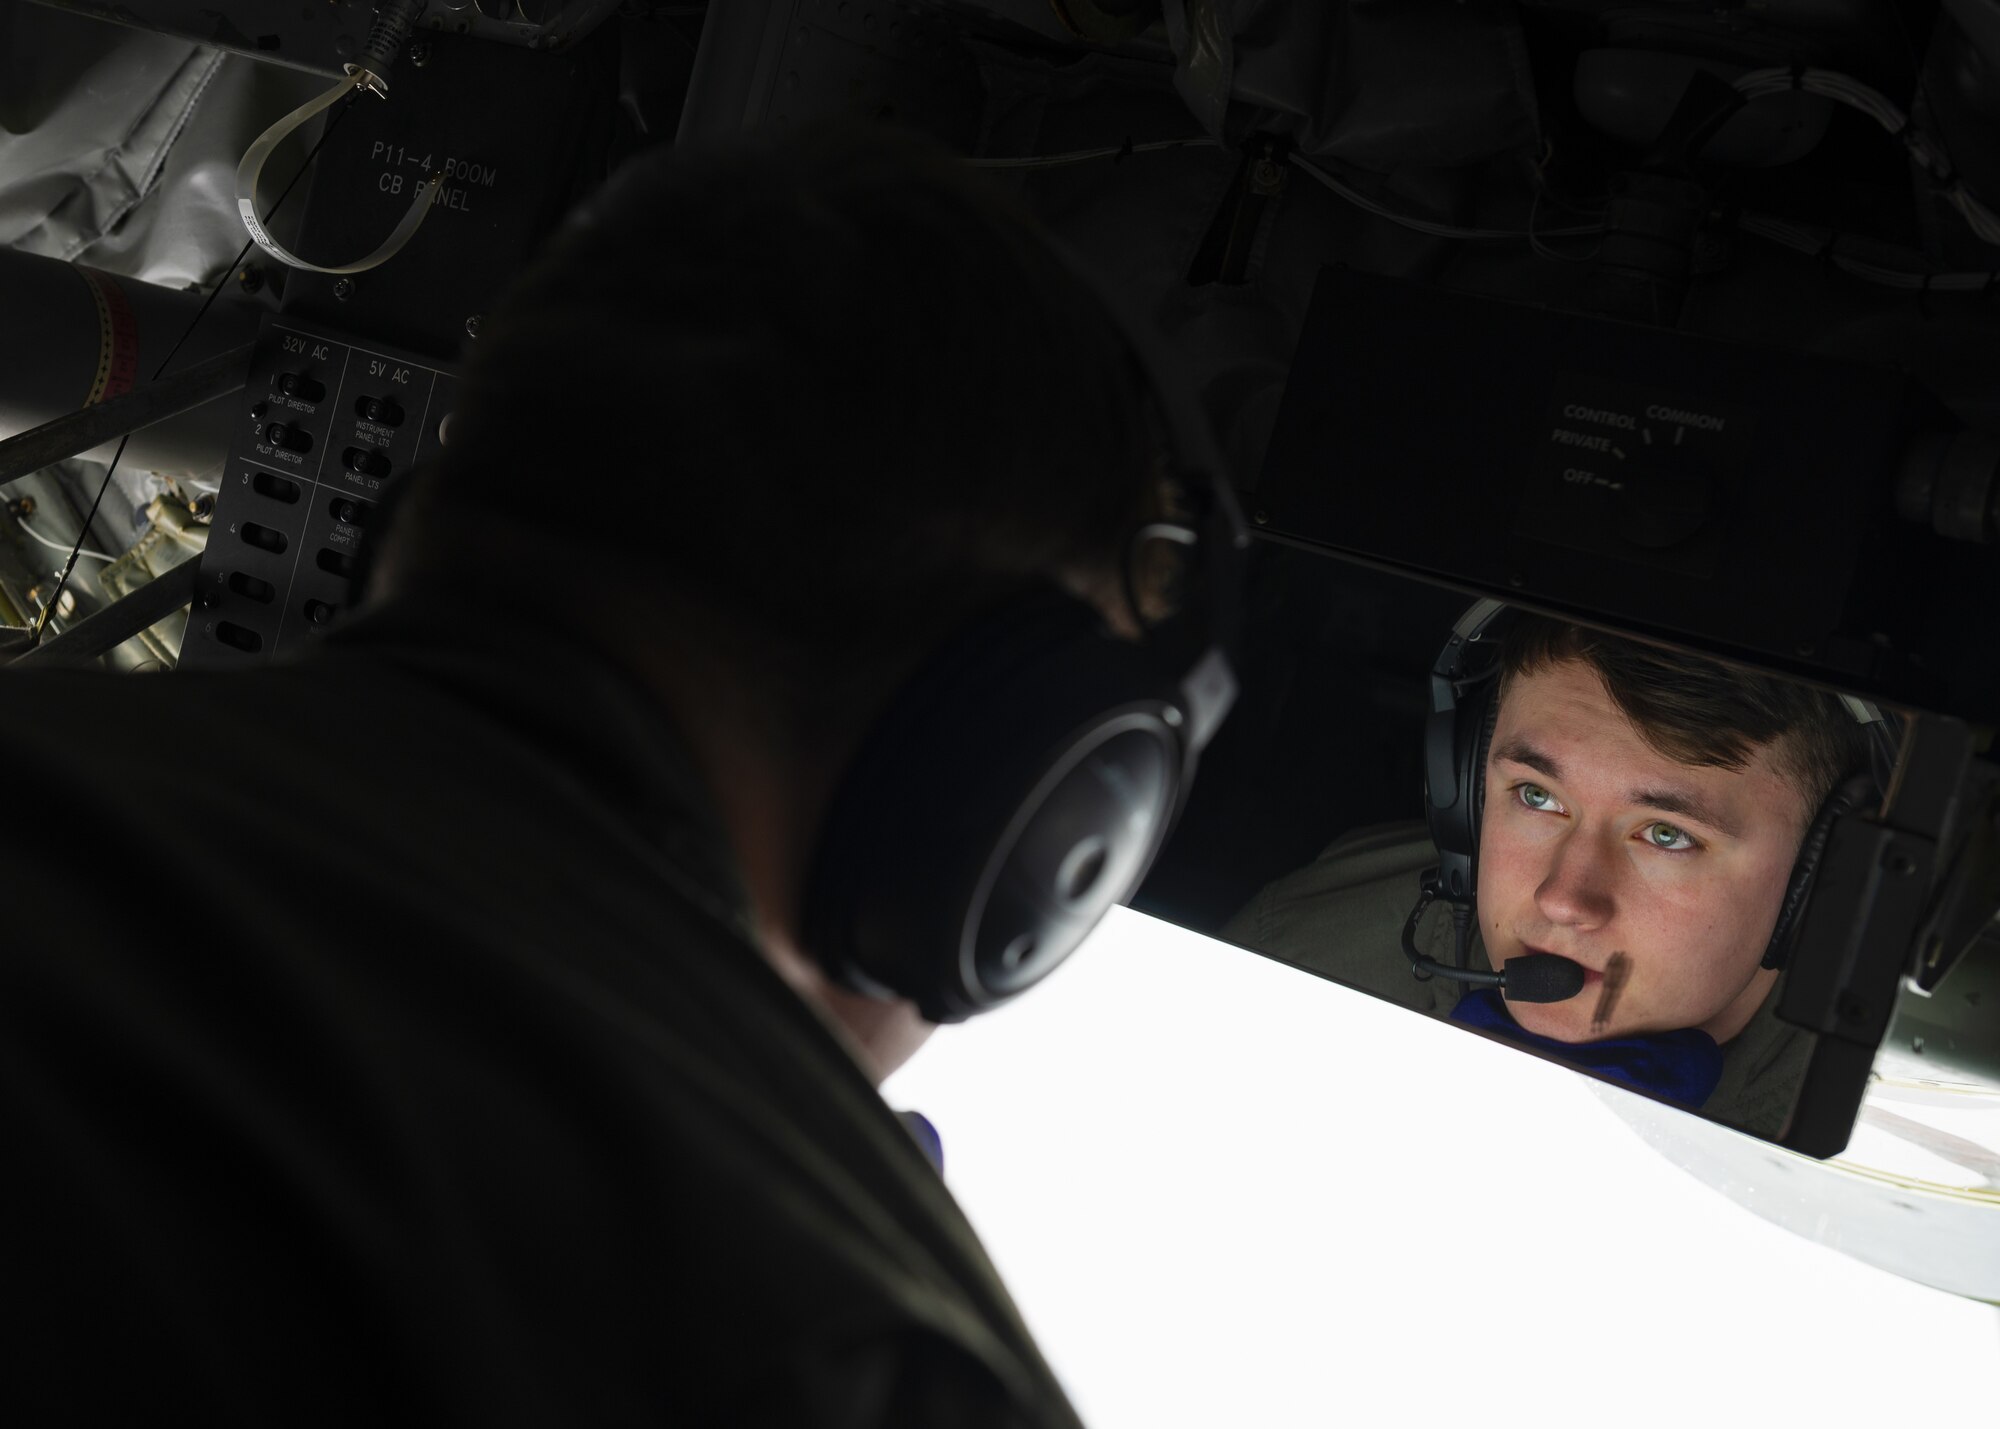 U.S. Air Force Senior Airman Sage Ledet, 384th Air Refueling Squadron inflight refueling specialist, prepares to perform aerial refueling during Fairchild’s Phase Two preparation exercise for Air Mobility Command’s capstone exercise, Mobility Guardian 2023, Feb. 14, 2023. The Phase 2 exercise emphasized aircrew endurance, dynamic air refueling concepts, testing of a variety of the KC-135 mission sets, and included an advanced 72-hour endurance event. (U.S. Air Force photo by Staff Sgt. Lawrence Sena)